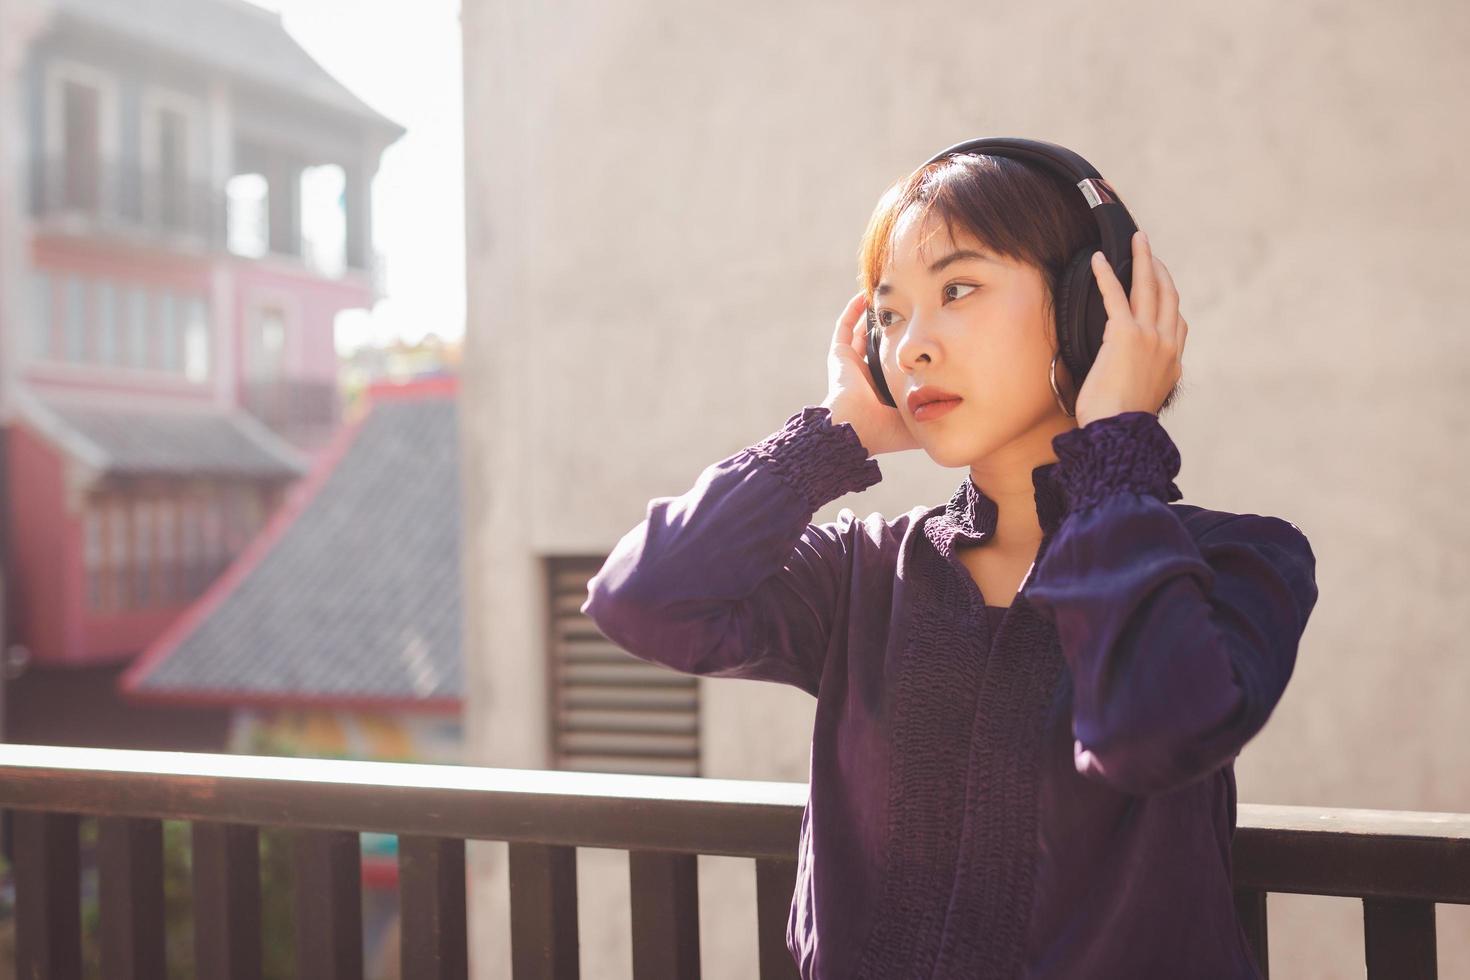 Happy young asian woman listening to music with headphones photo